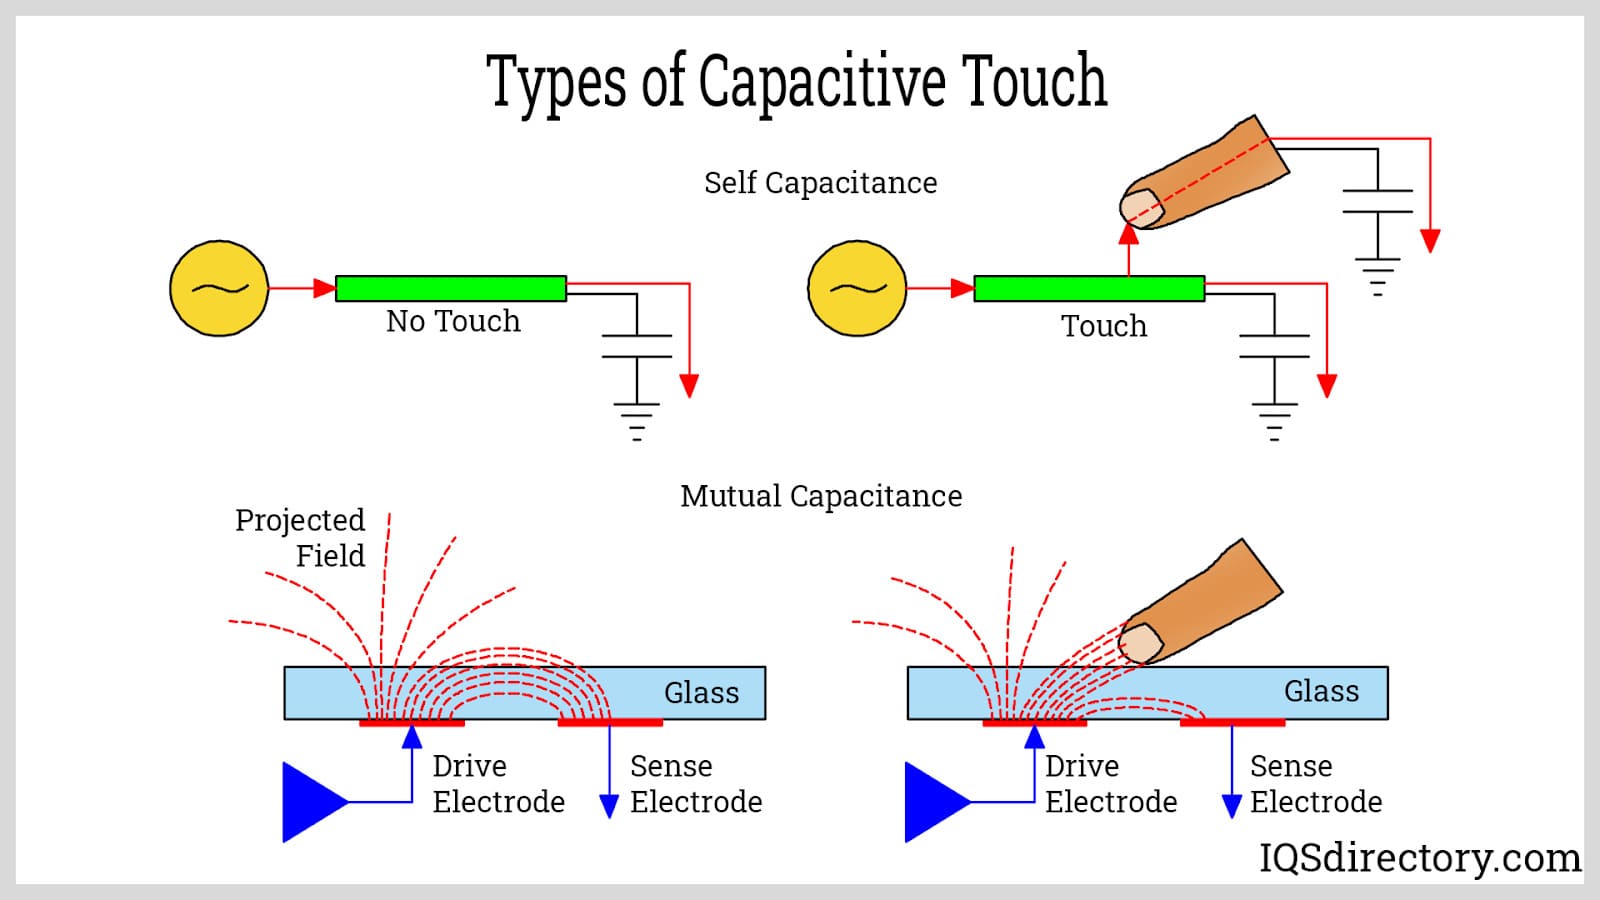 Types of Capacitive Touch